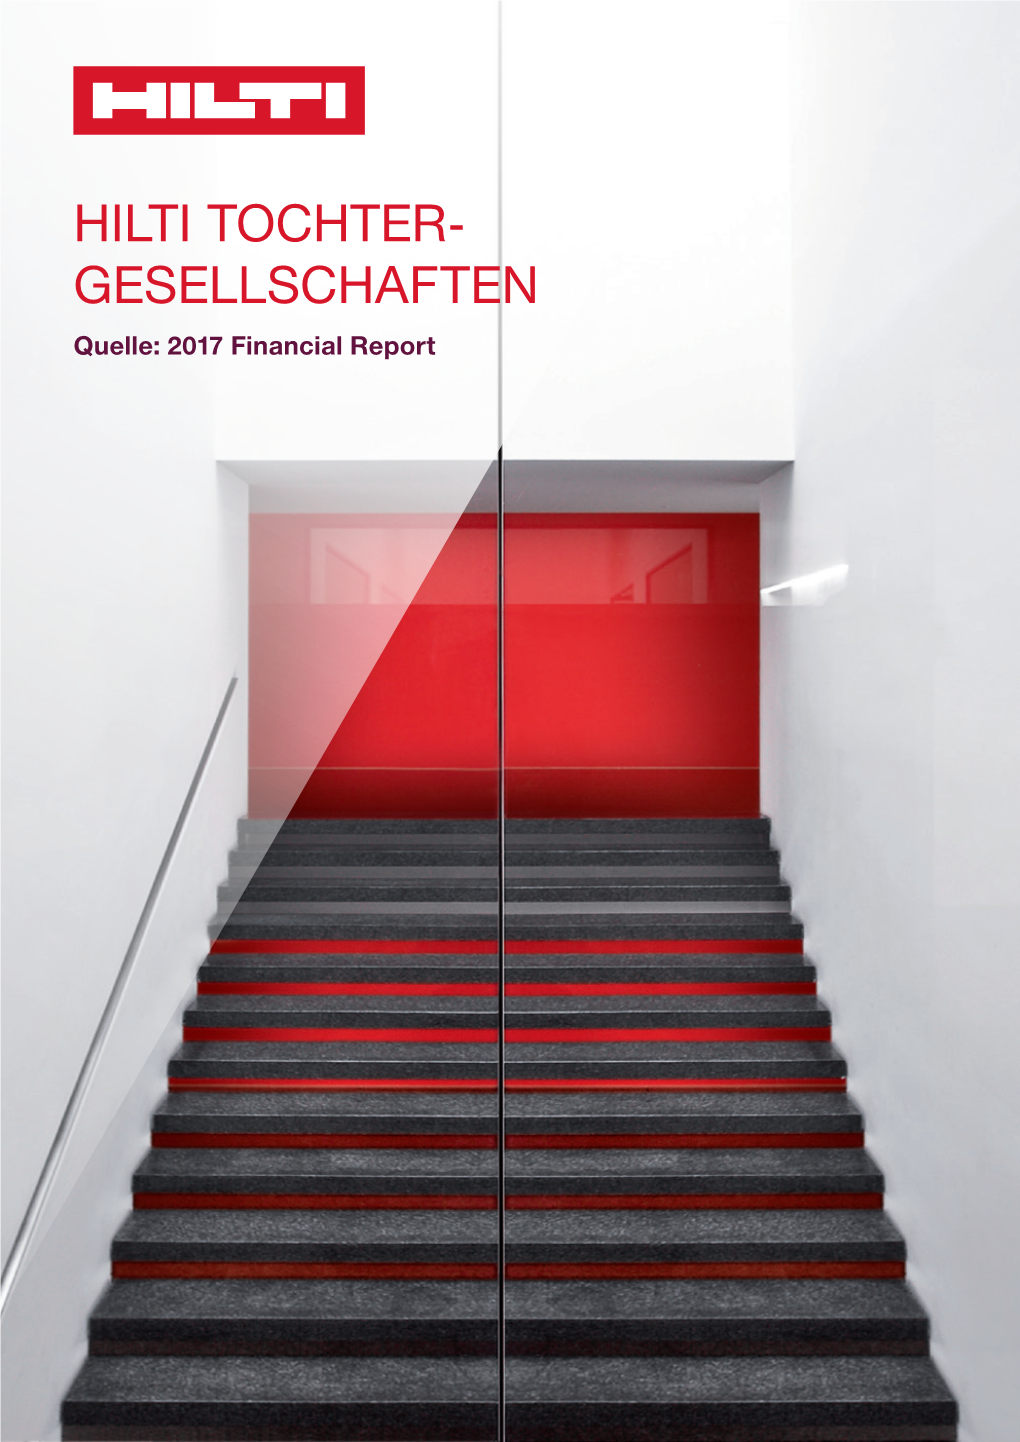 HILTI TOCHTER- GESELLSCHAFTEN Quelle: 2017 Financial Report Notes to the Consolidated Financial Statements